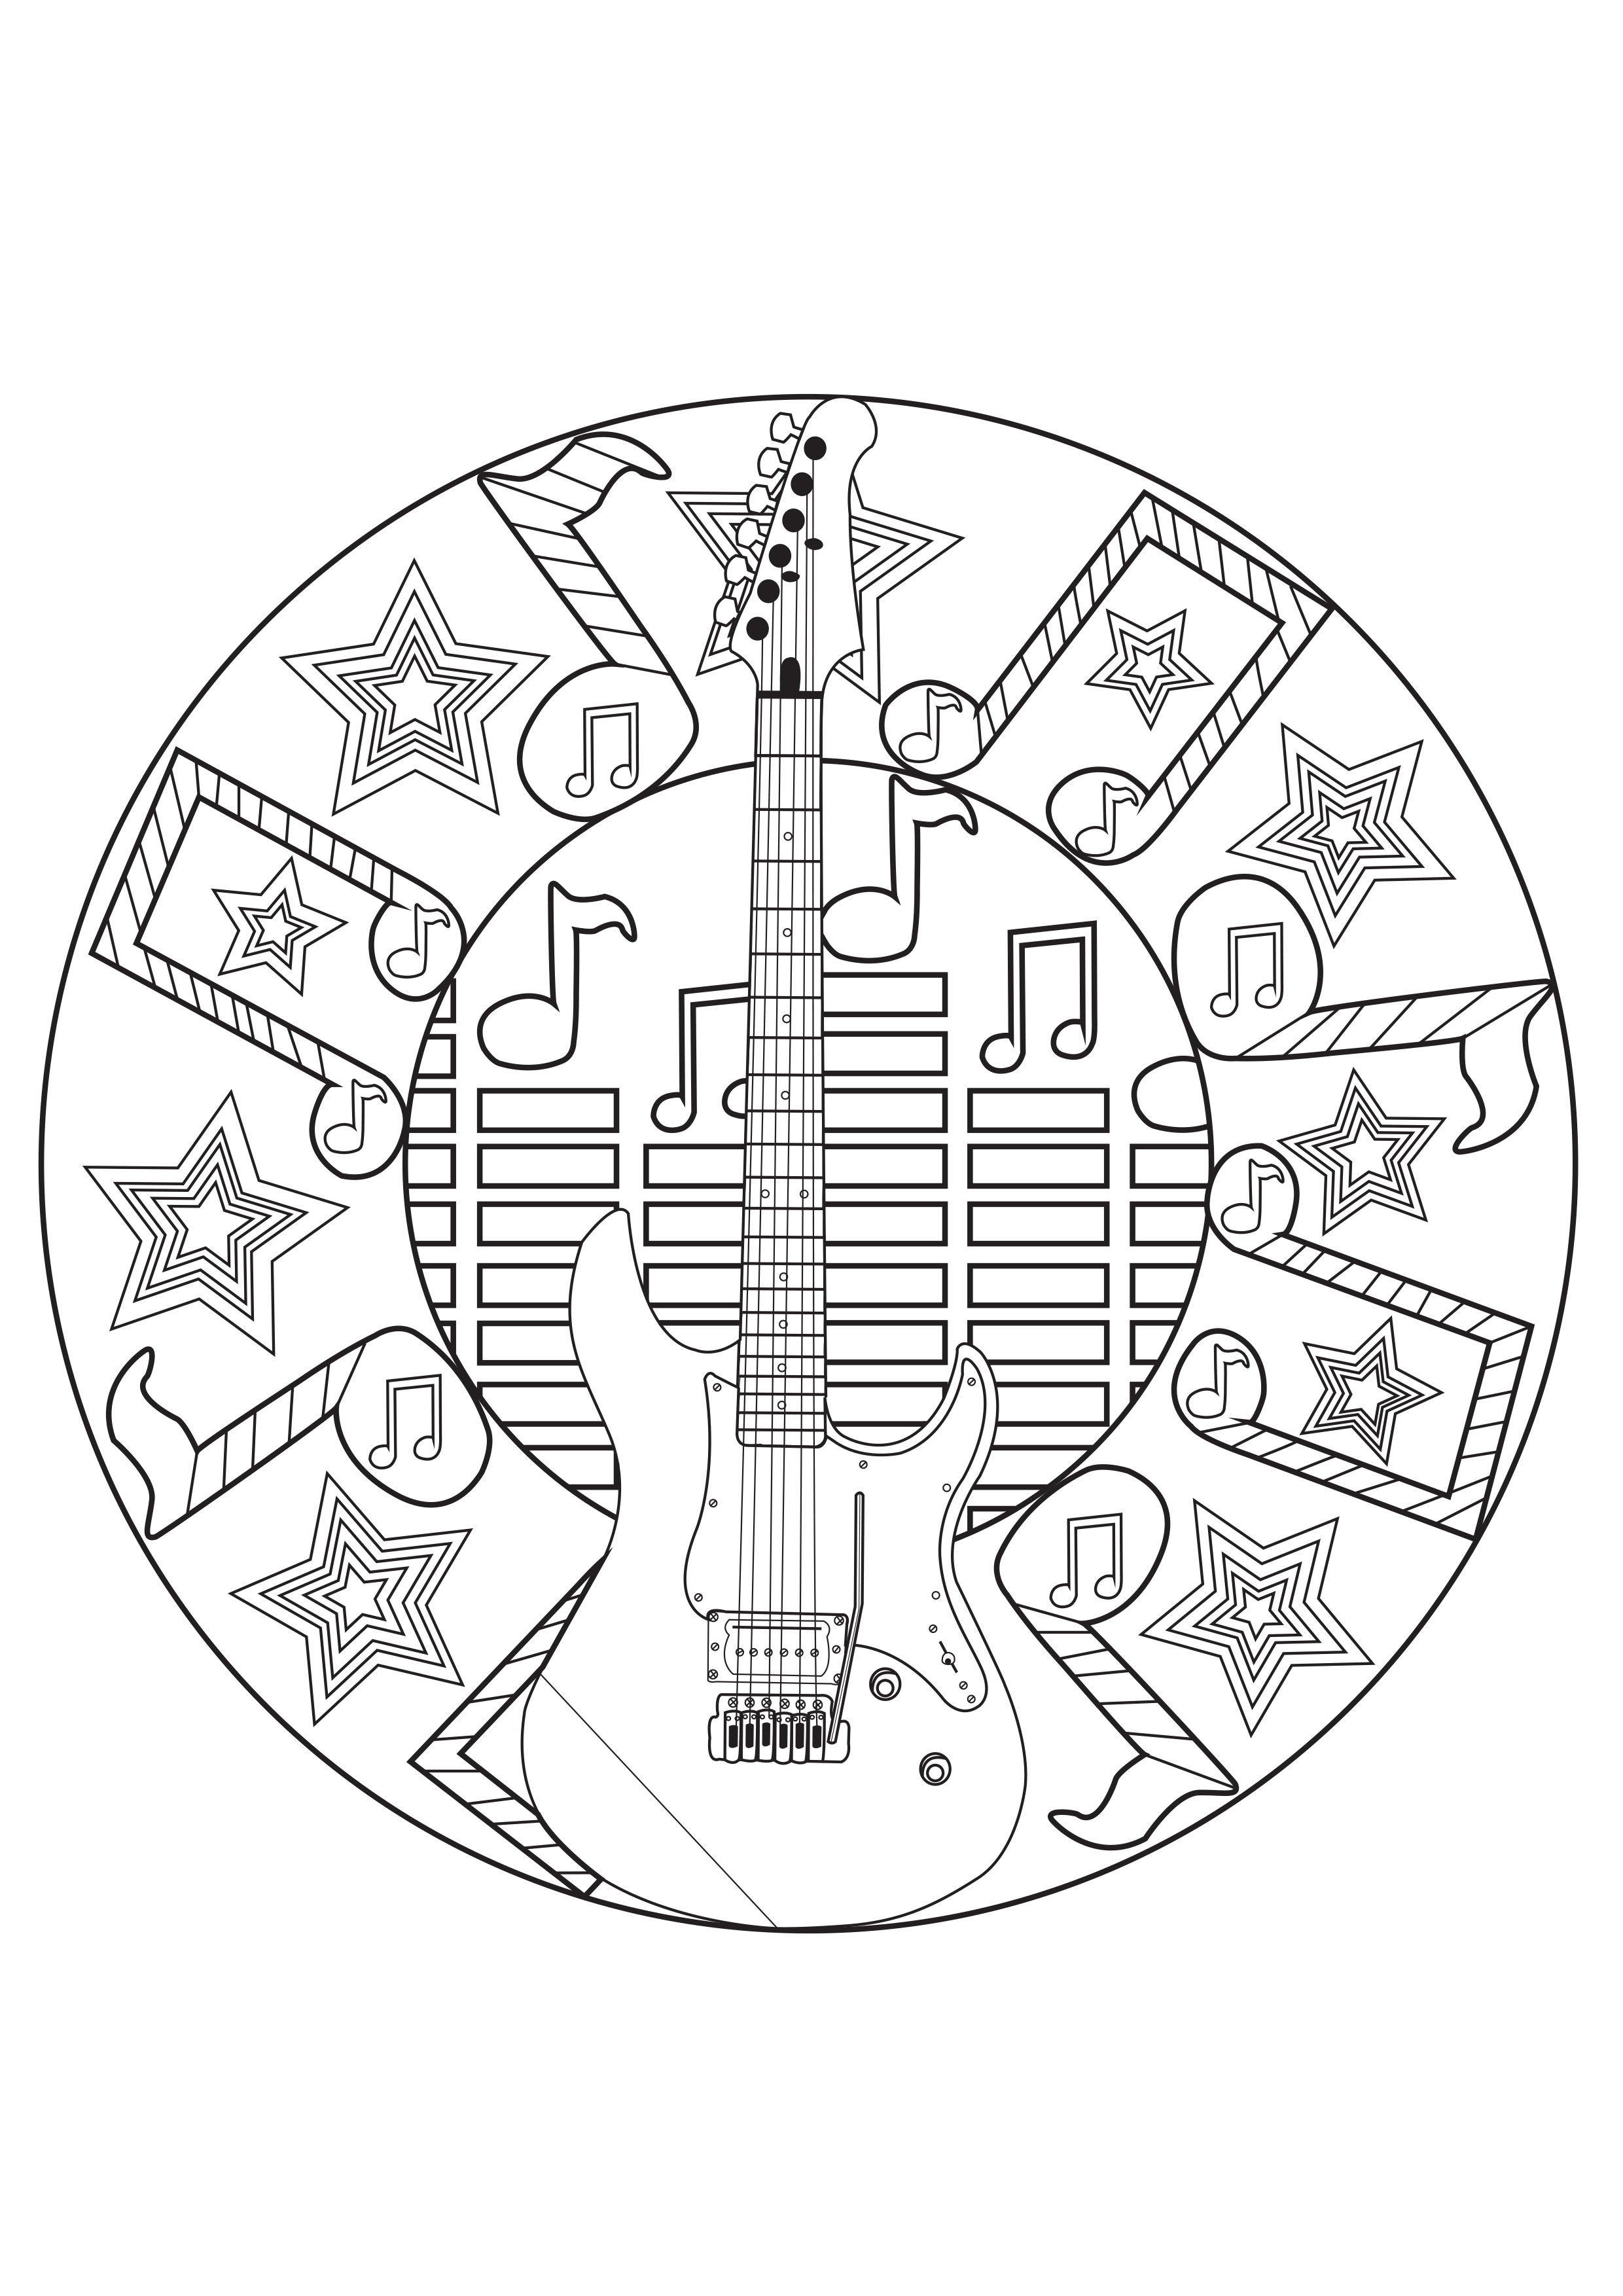 A Rockn'roll Mandala for a coloring page dedicated to music